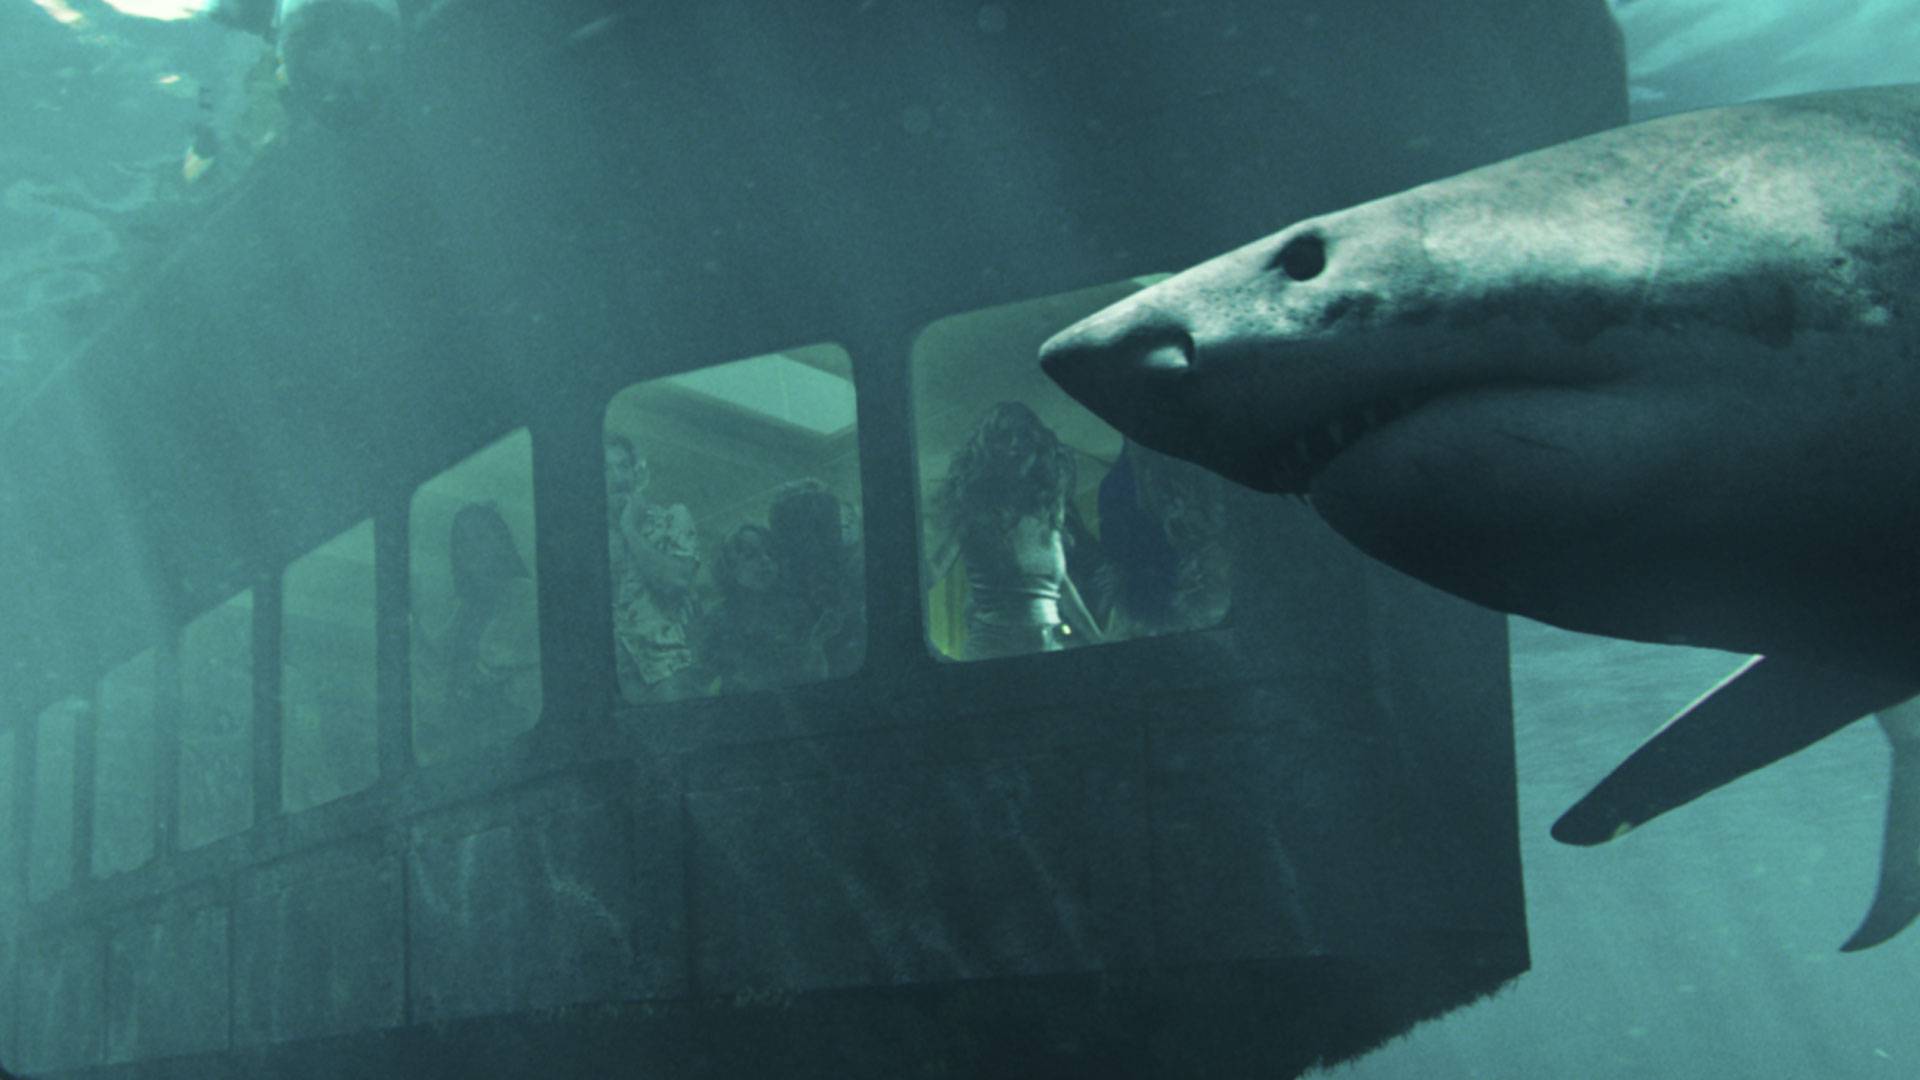 We’re gonna’ need a bigger boat as popular shark horror movie franchise 47 Meters Down is getting another installment